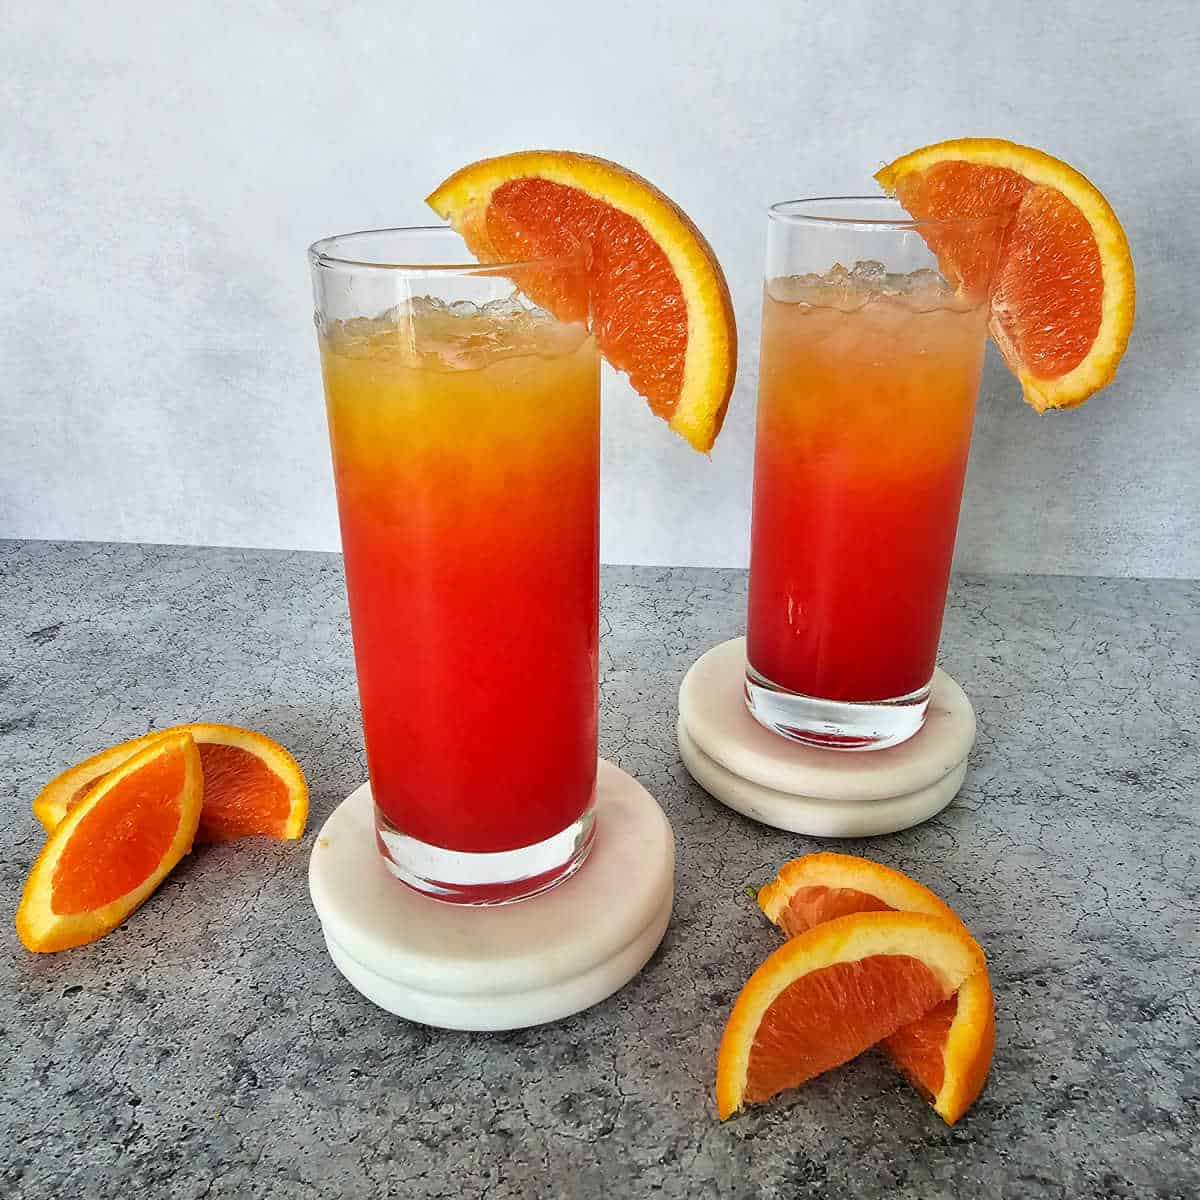 Two Vodka Sunrise Cocktails in tall glasses with orange wedges garnish